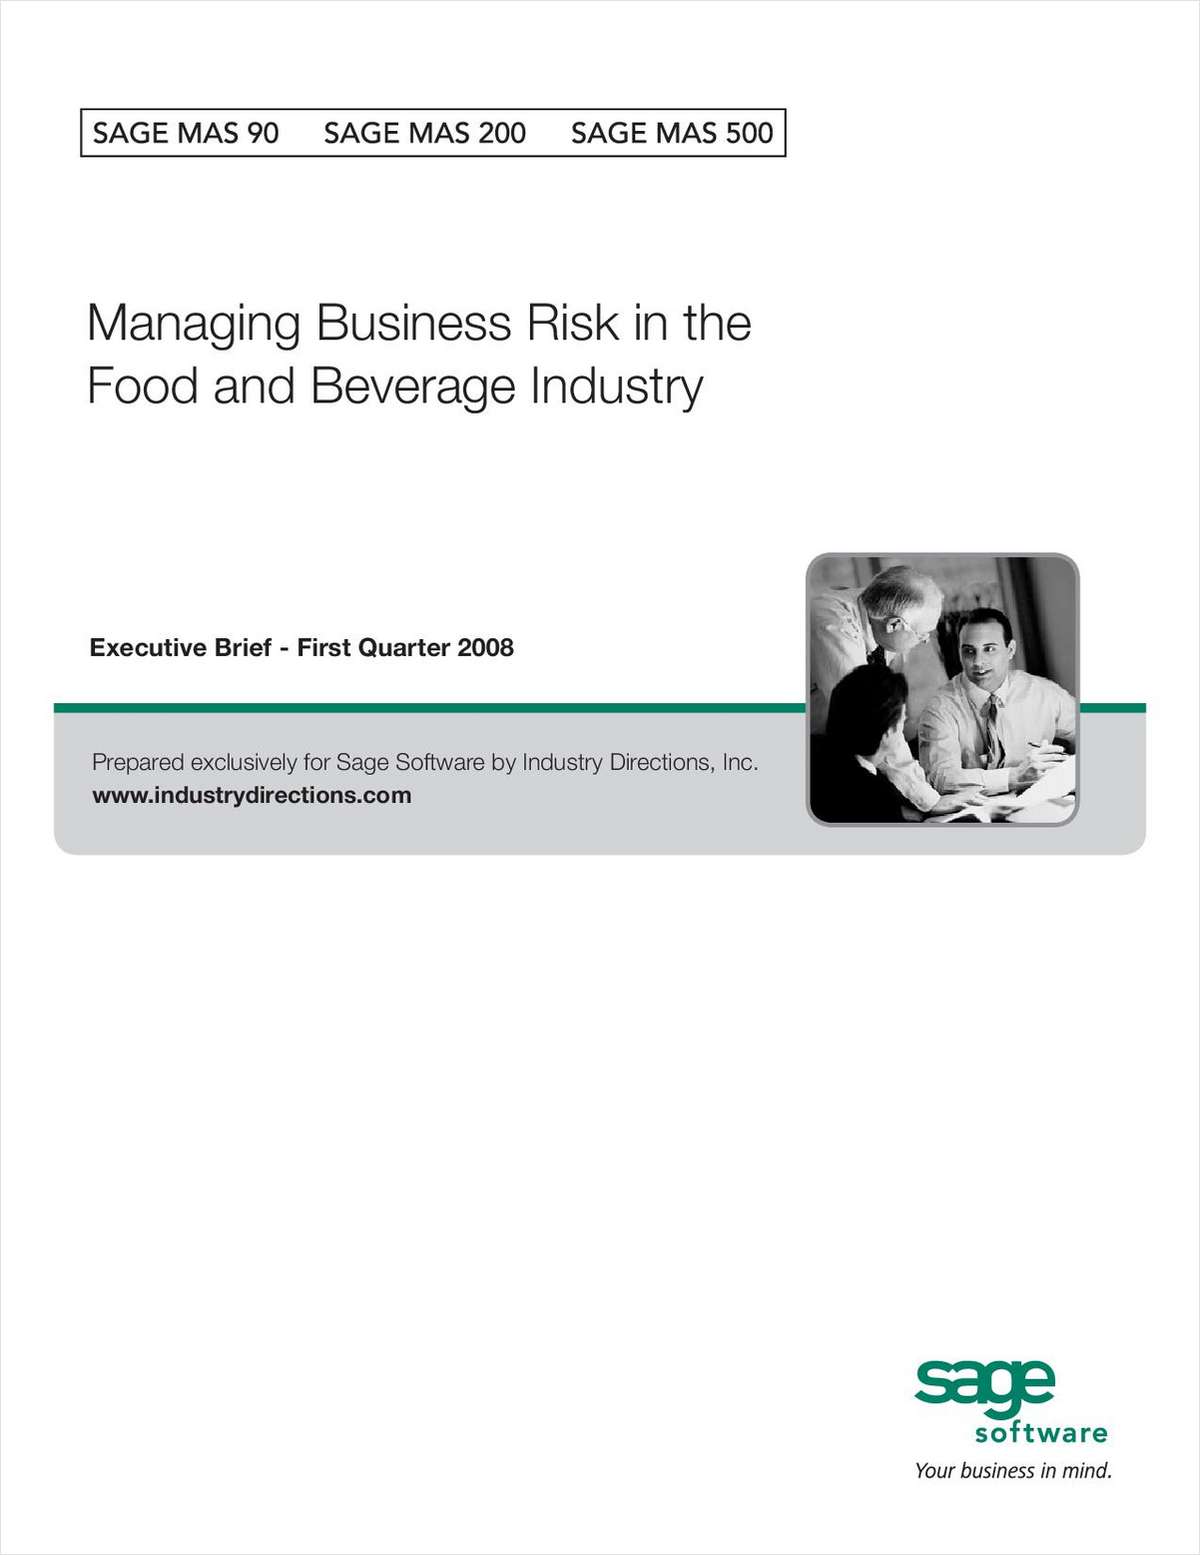 Managing Business Risk in the Food & Beverage Industry